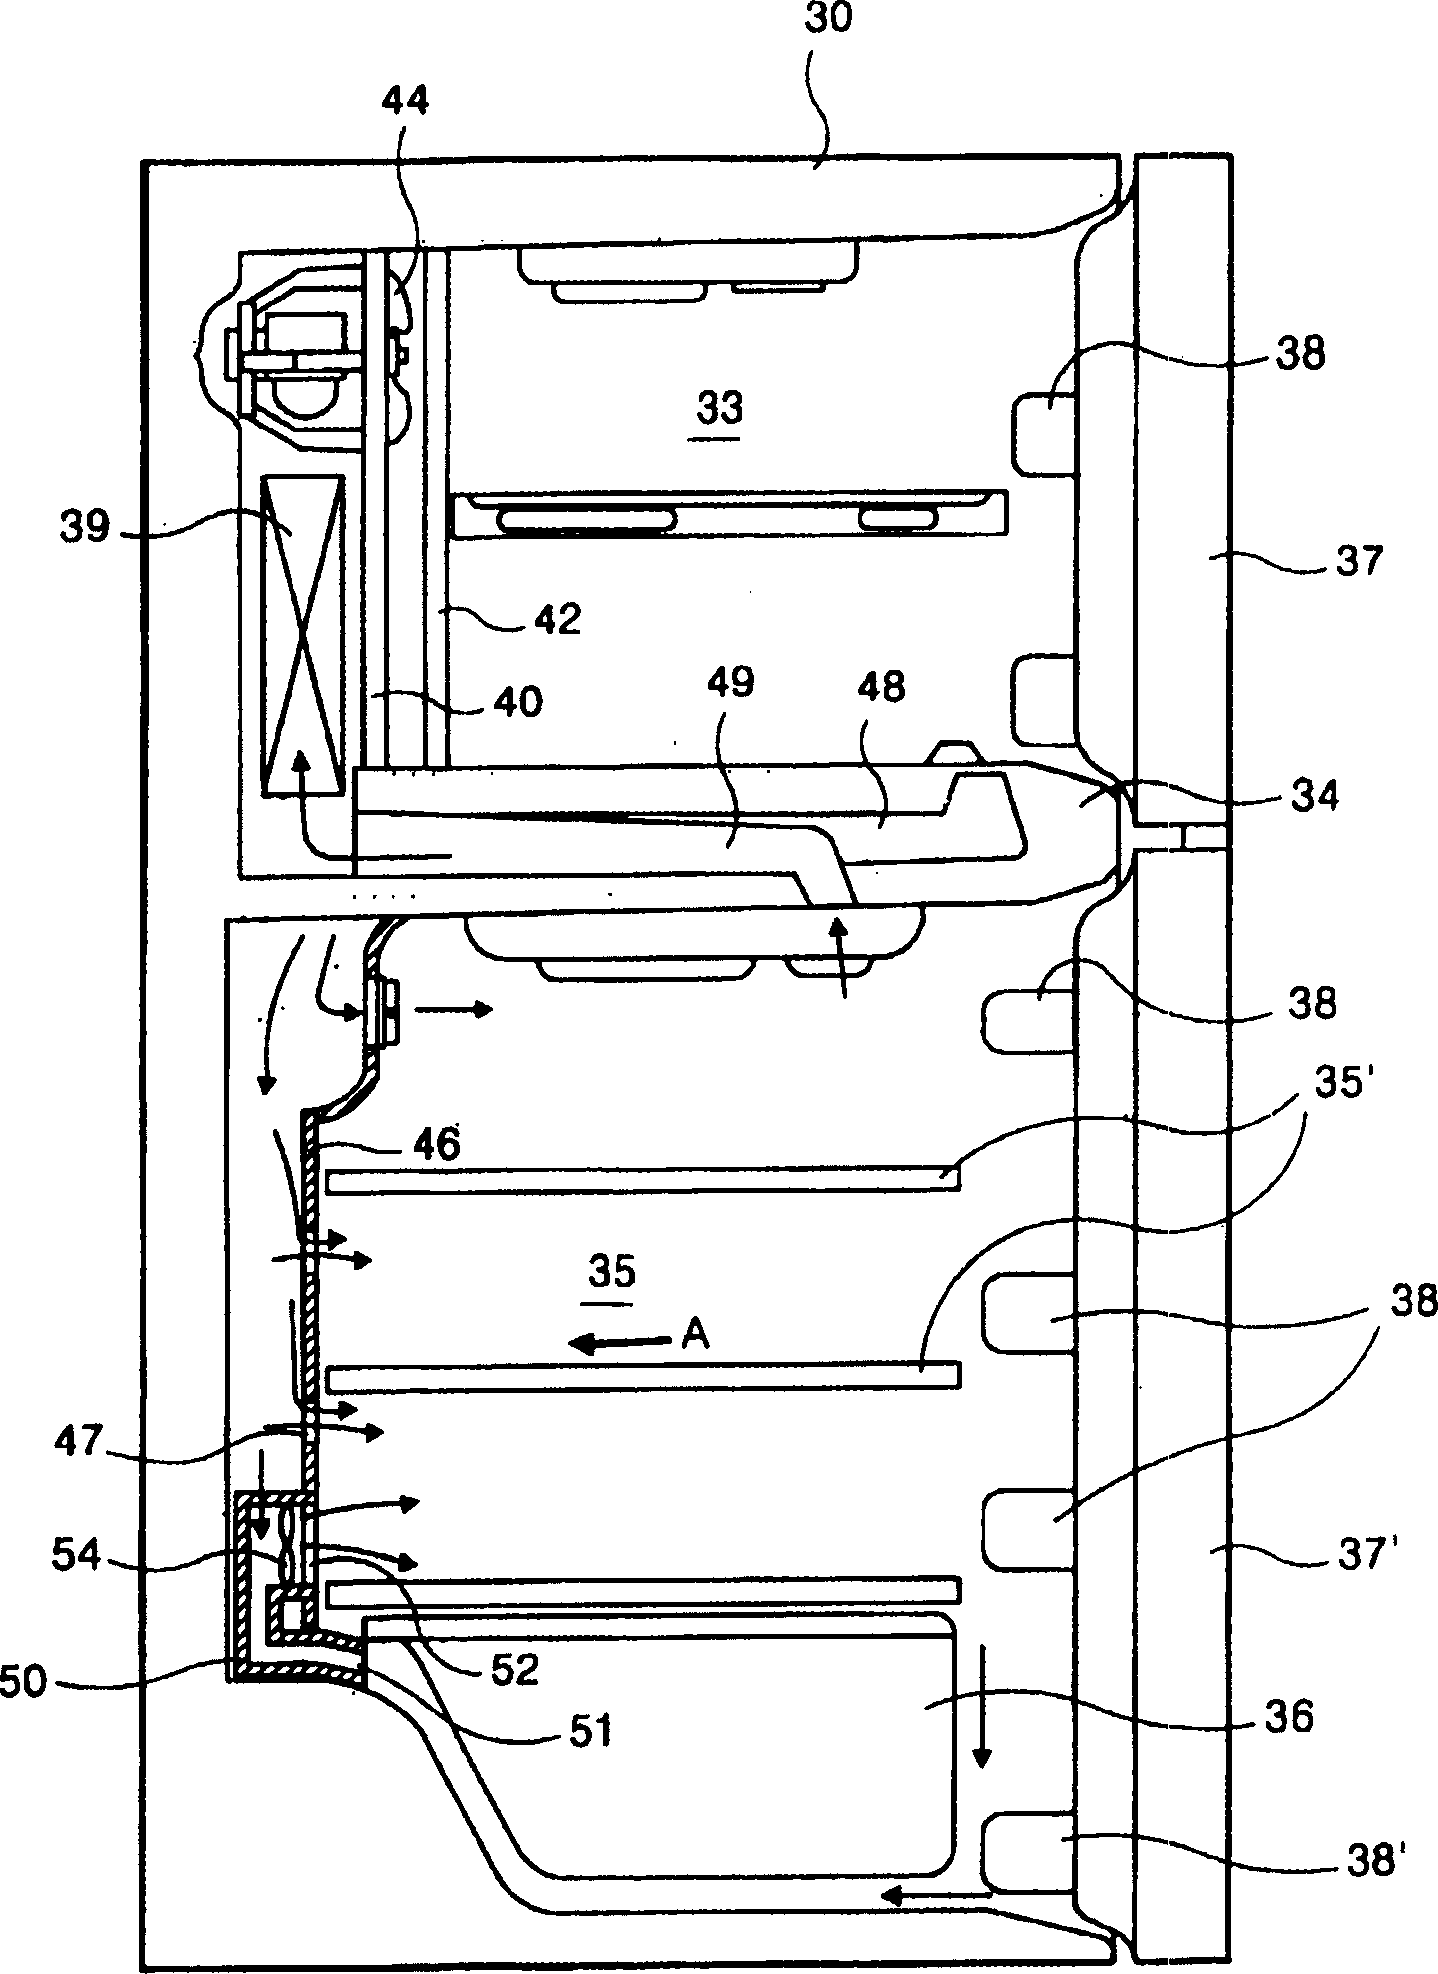 Apparatus and method for controlling cold air circulation in refrigerator